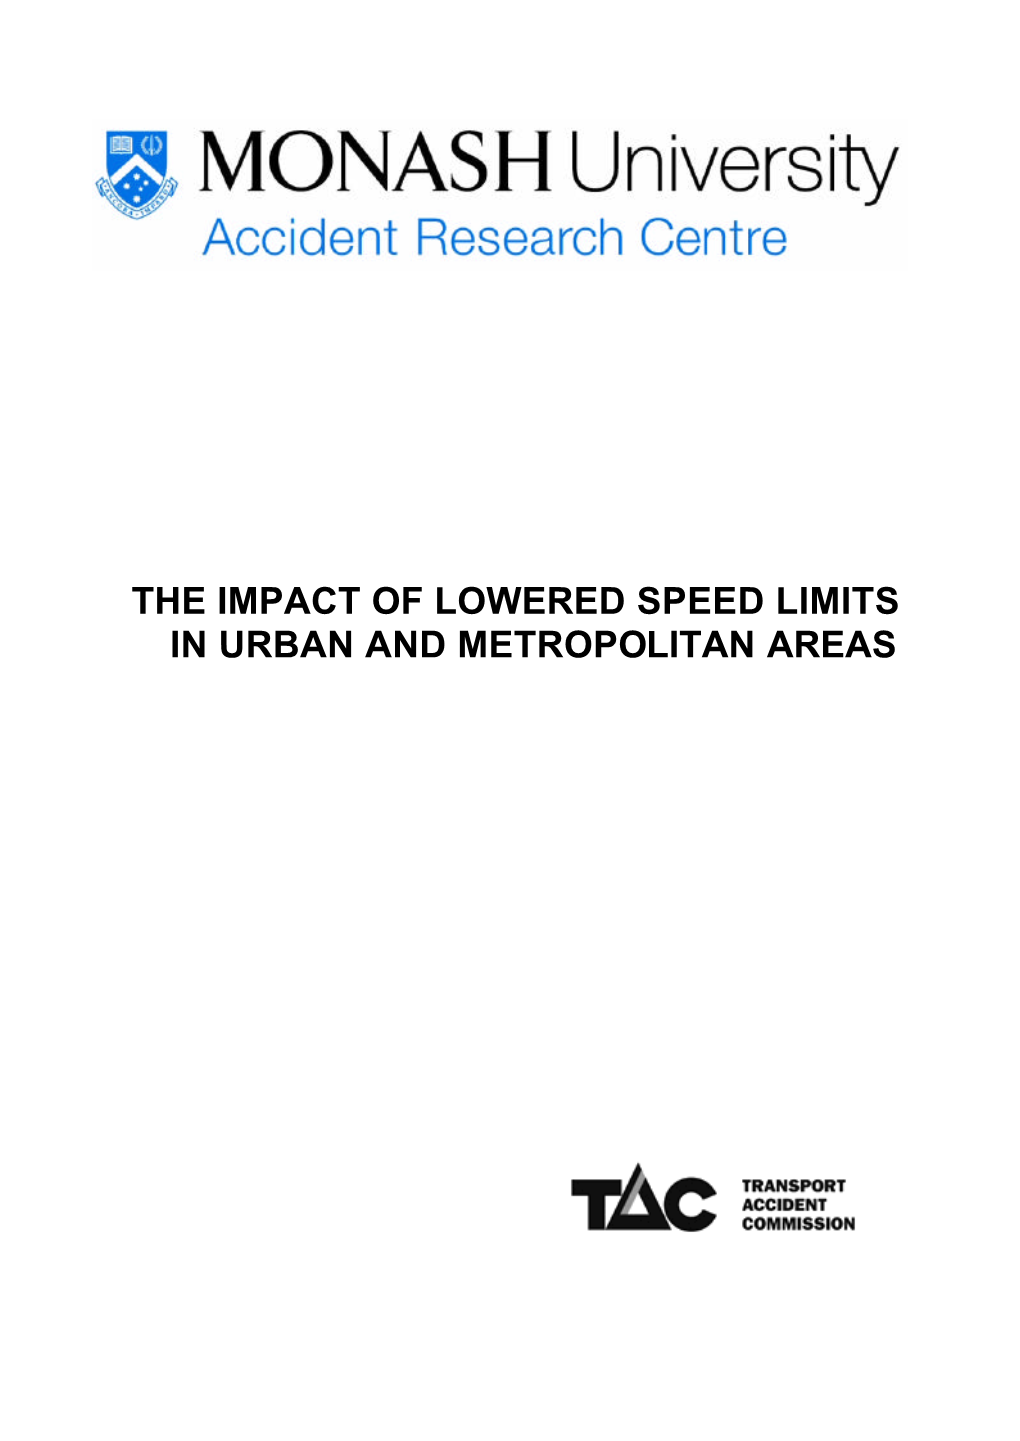 THE IMPACT of LOWERED SPEED LIMITS in URBAN/METROPOLITAN AREAS Author(S): Archer, J., Fotheringham, N., Symmons, M